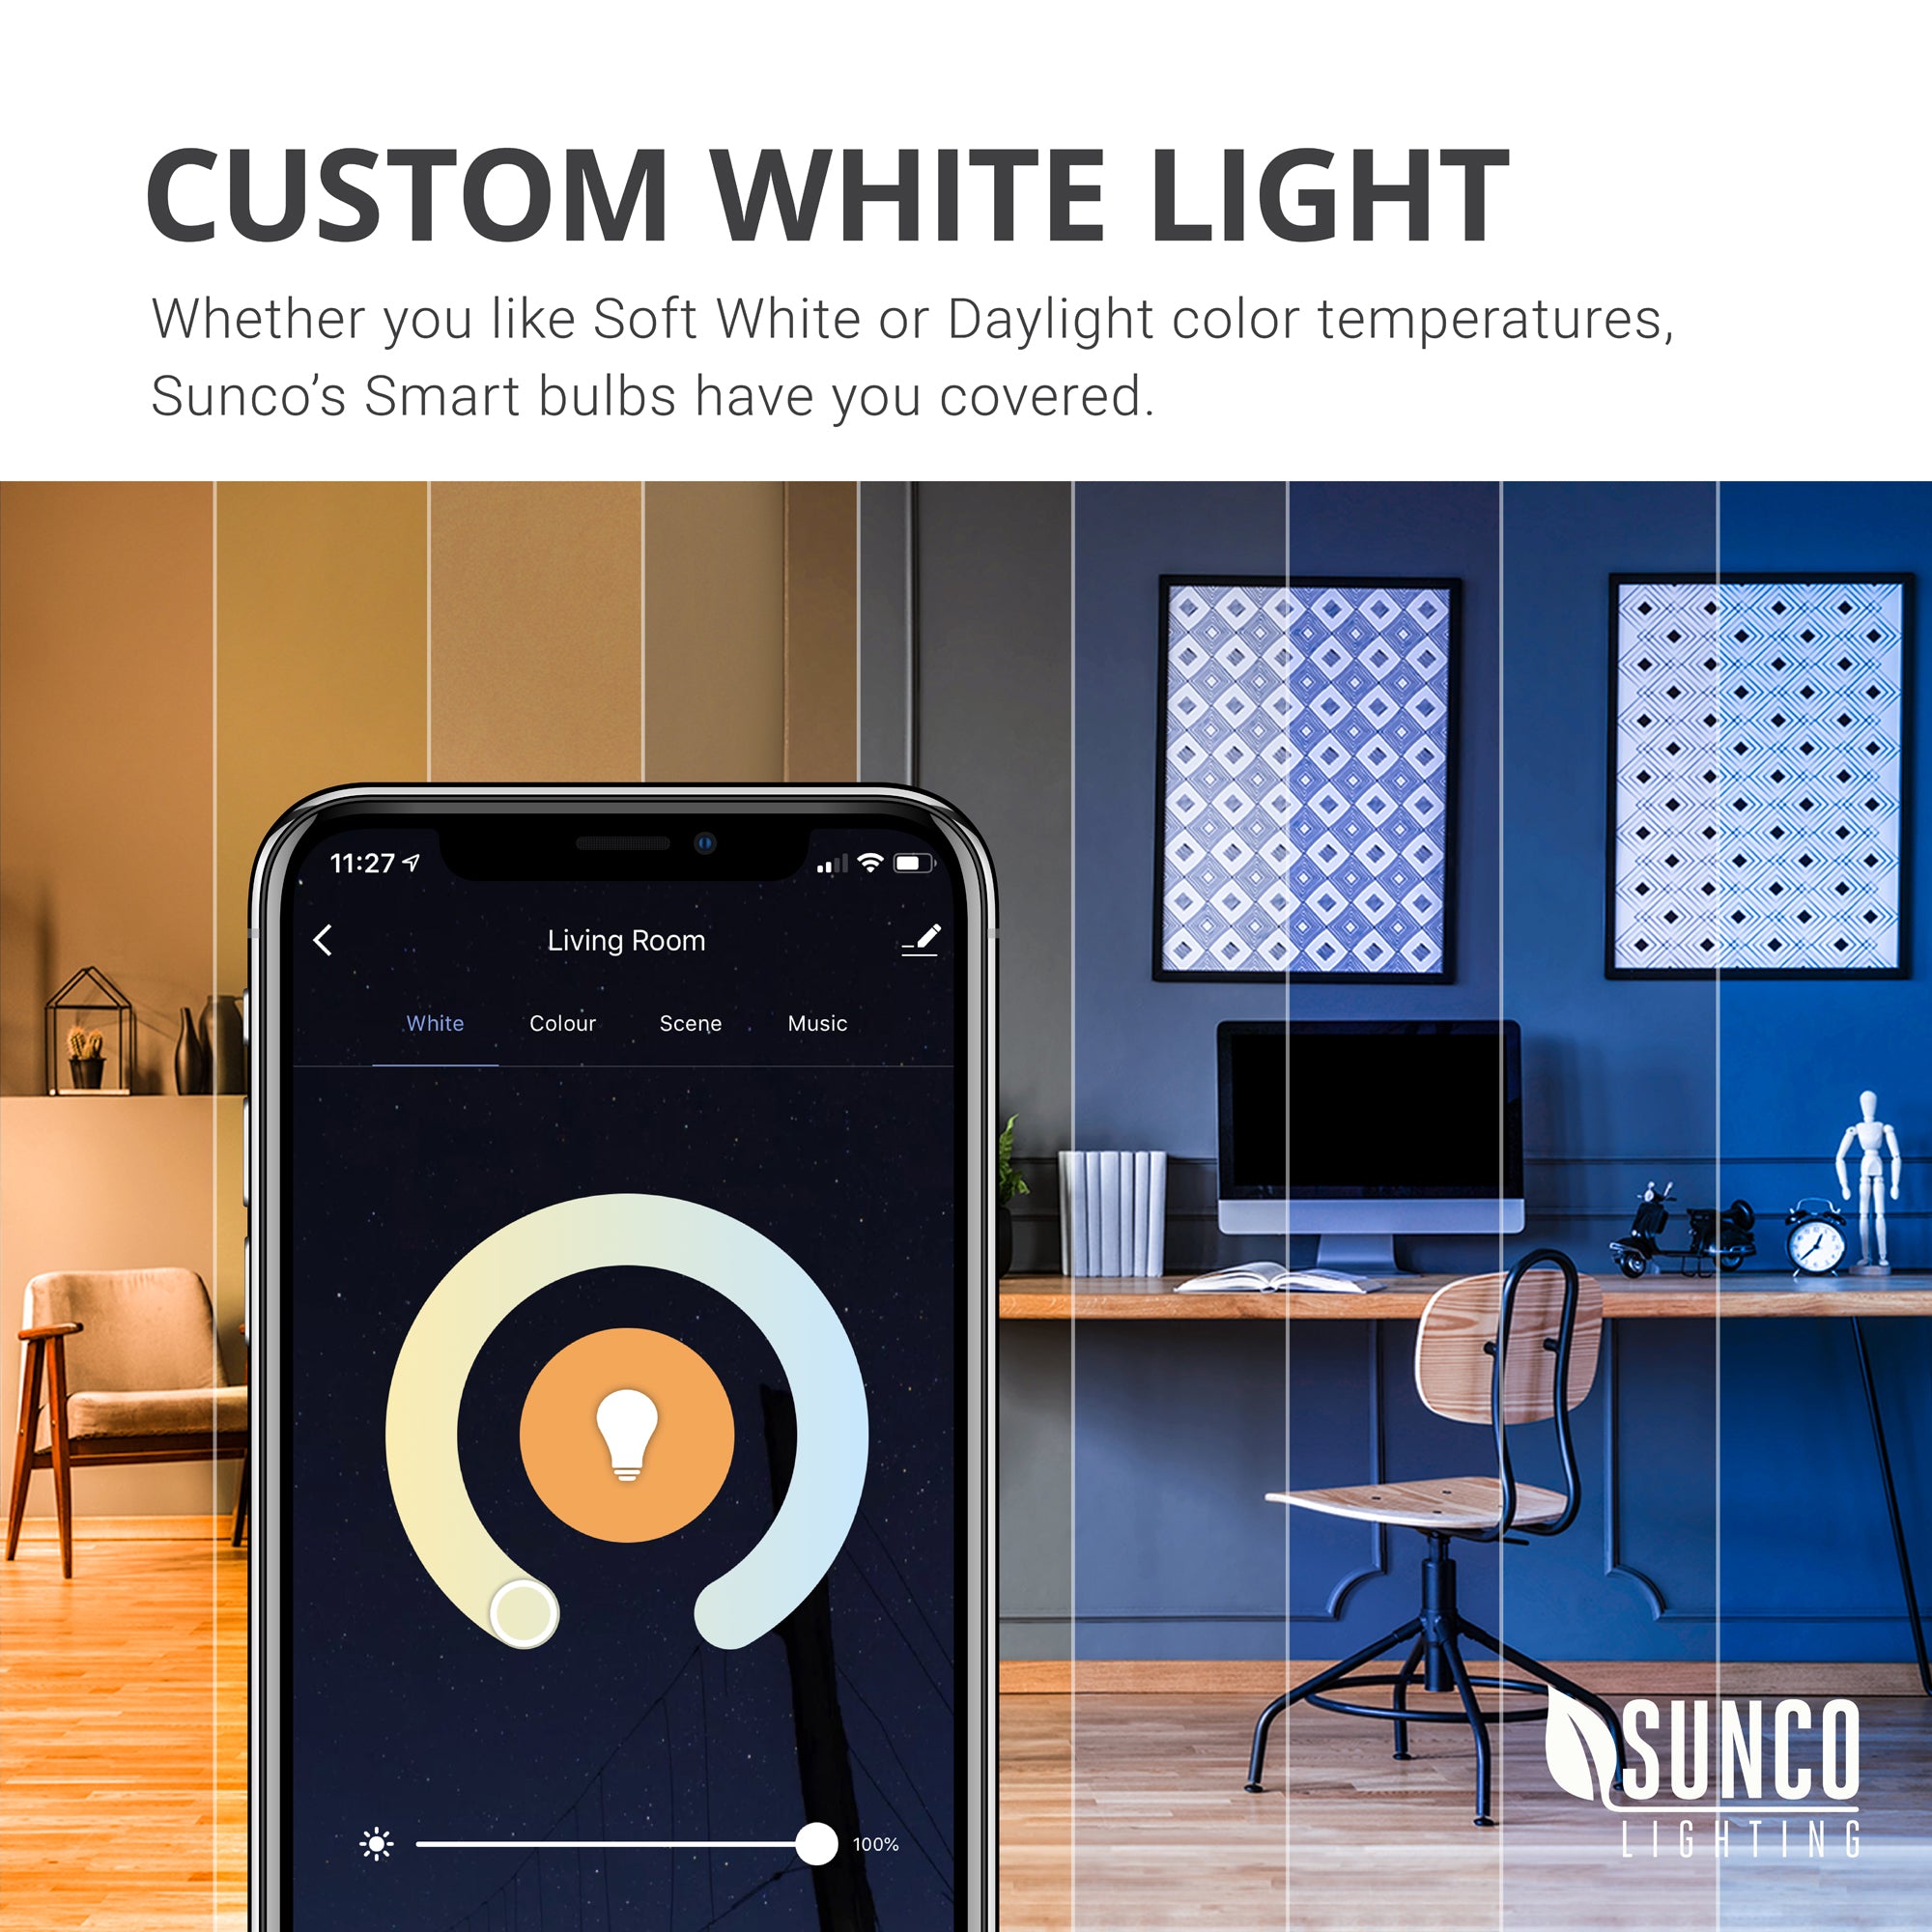 Custom White Light. Whether you light Soft White or Daylight color temperatures, Sunco Lighting LED Smart Bulbs have you covered. Use the easy color wheel to swipe and select the CCT white light color temperature you prefer in each room. Image shows a closeup of the easy app on a smart phone and a simulation in an office and living room of warm to cool color temperatures to show the light quality choices available with just a single smart bulb.